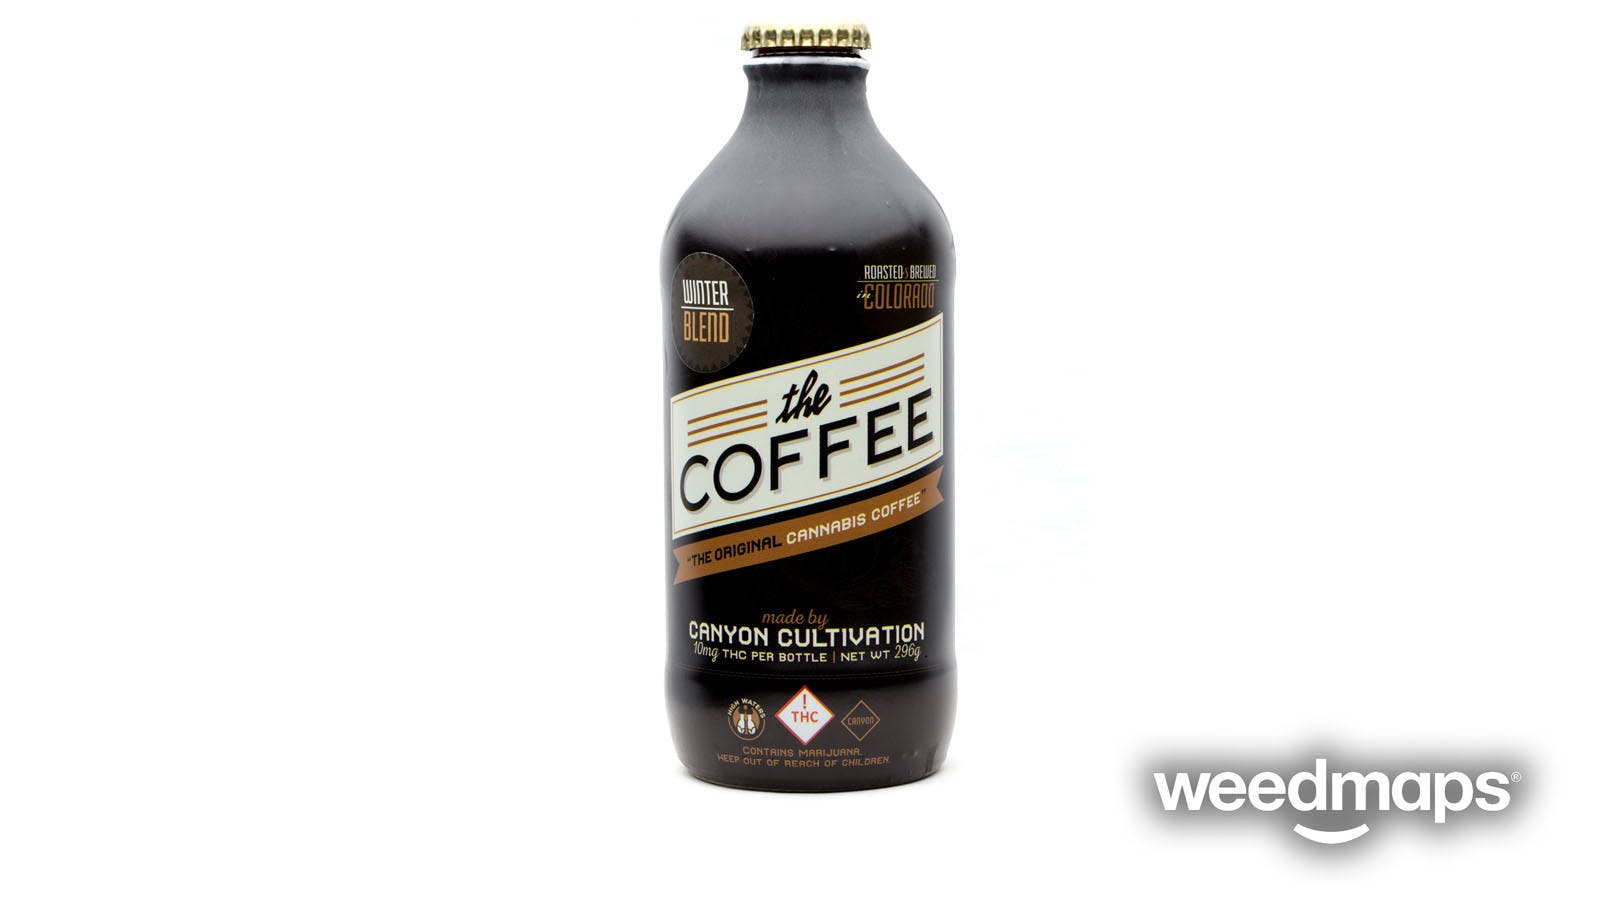 drink-canyon-cultivation-the-coffee-10mg